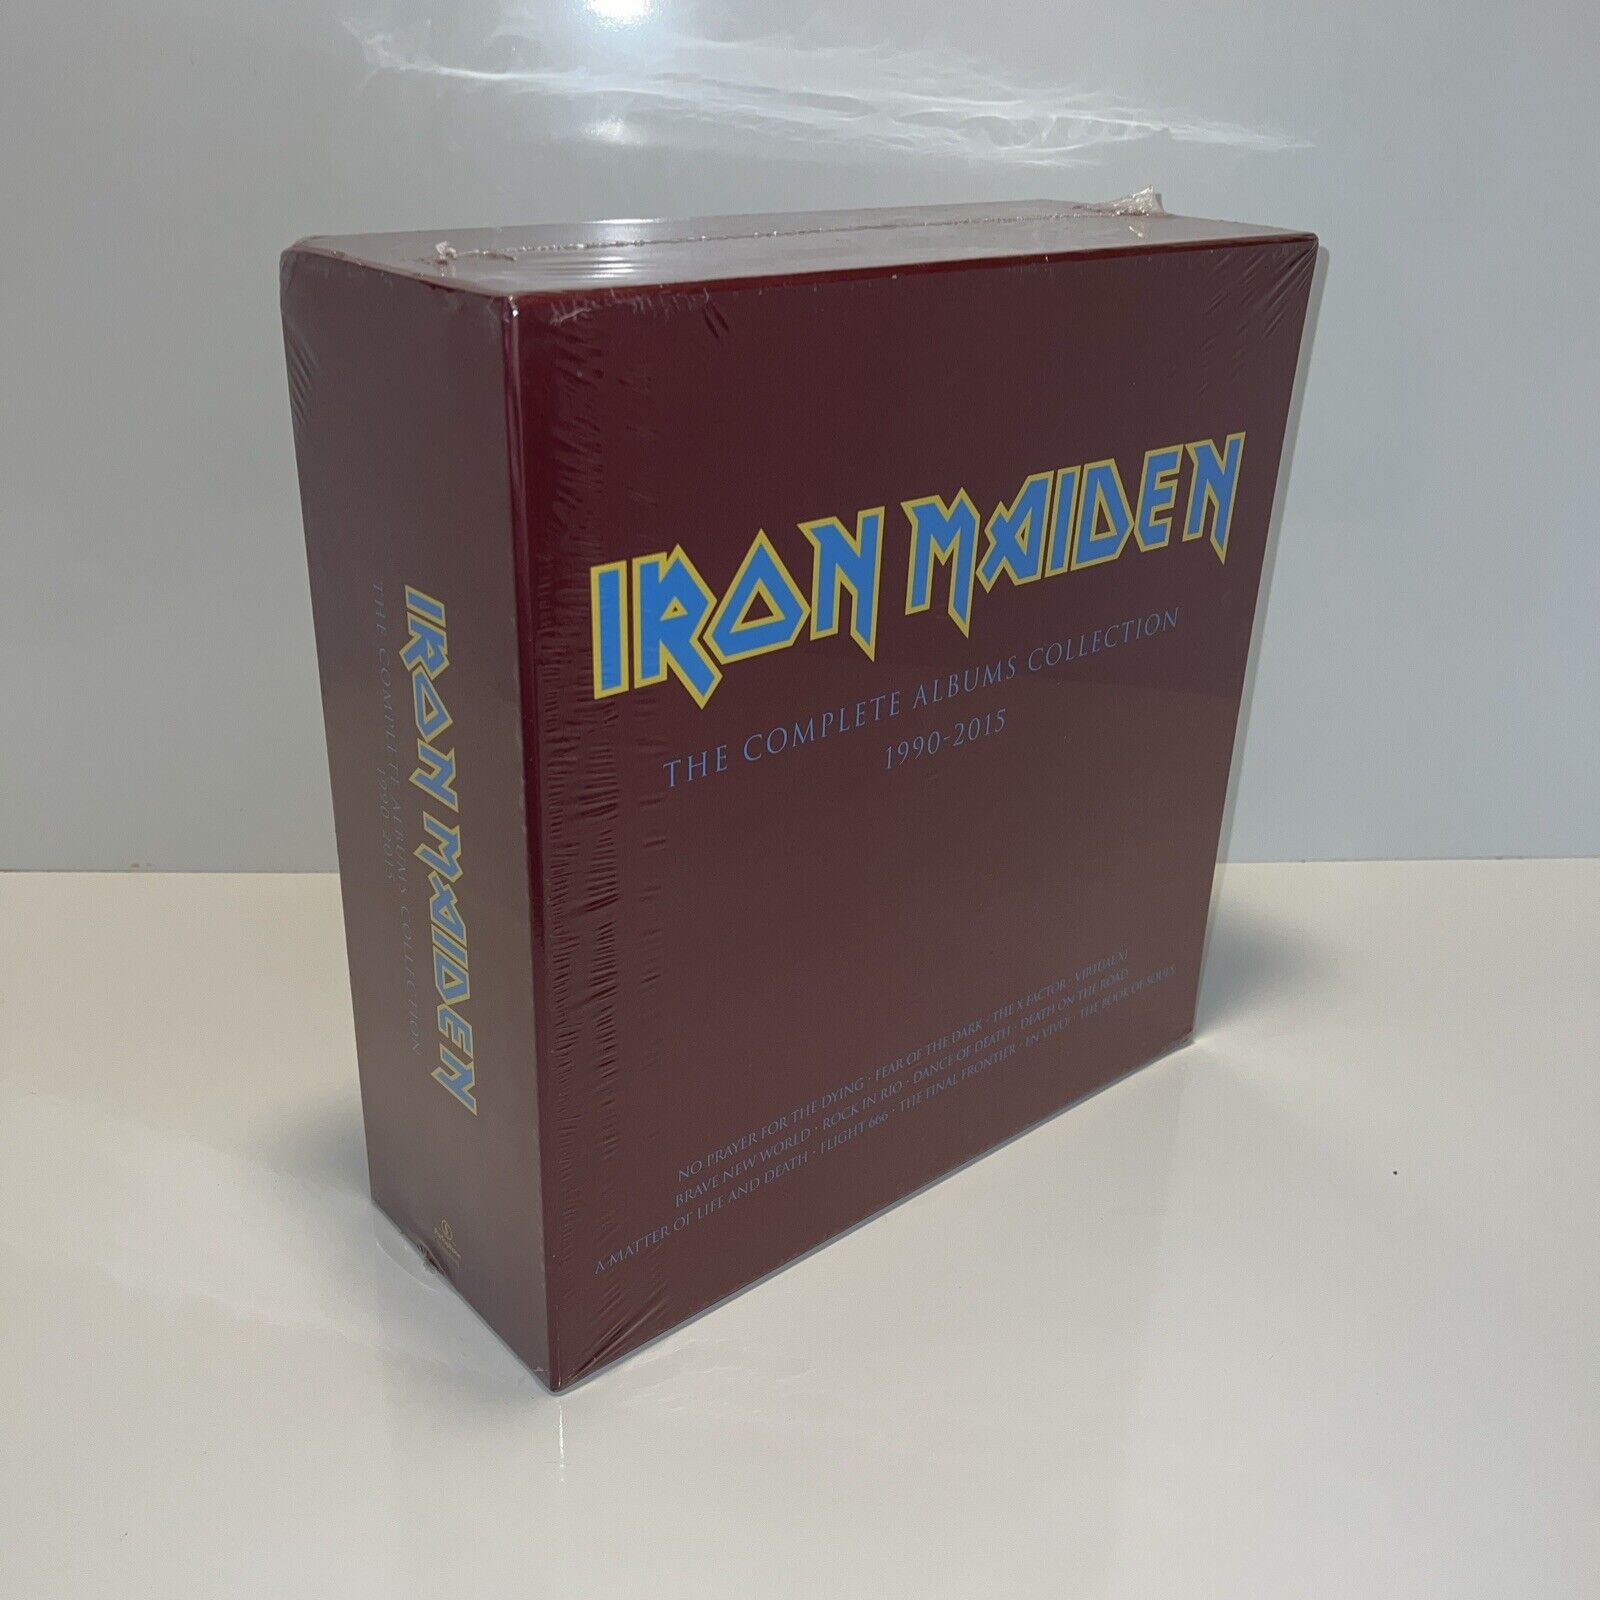 Iron Maiden The Complete Albums Collection 1990-2015 VINYL BOX SEALED